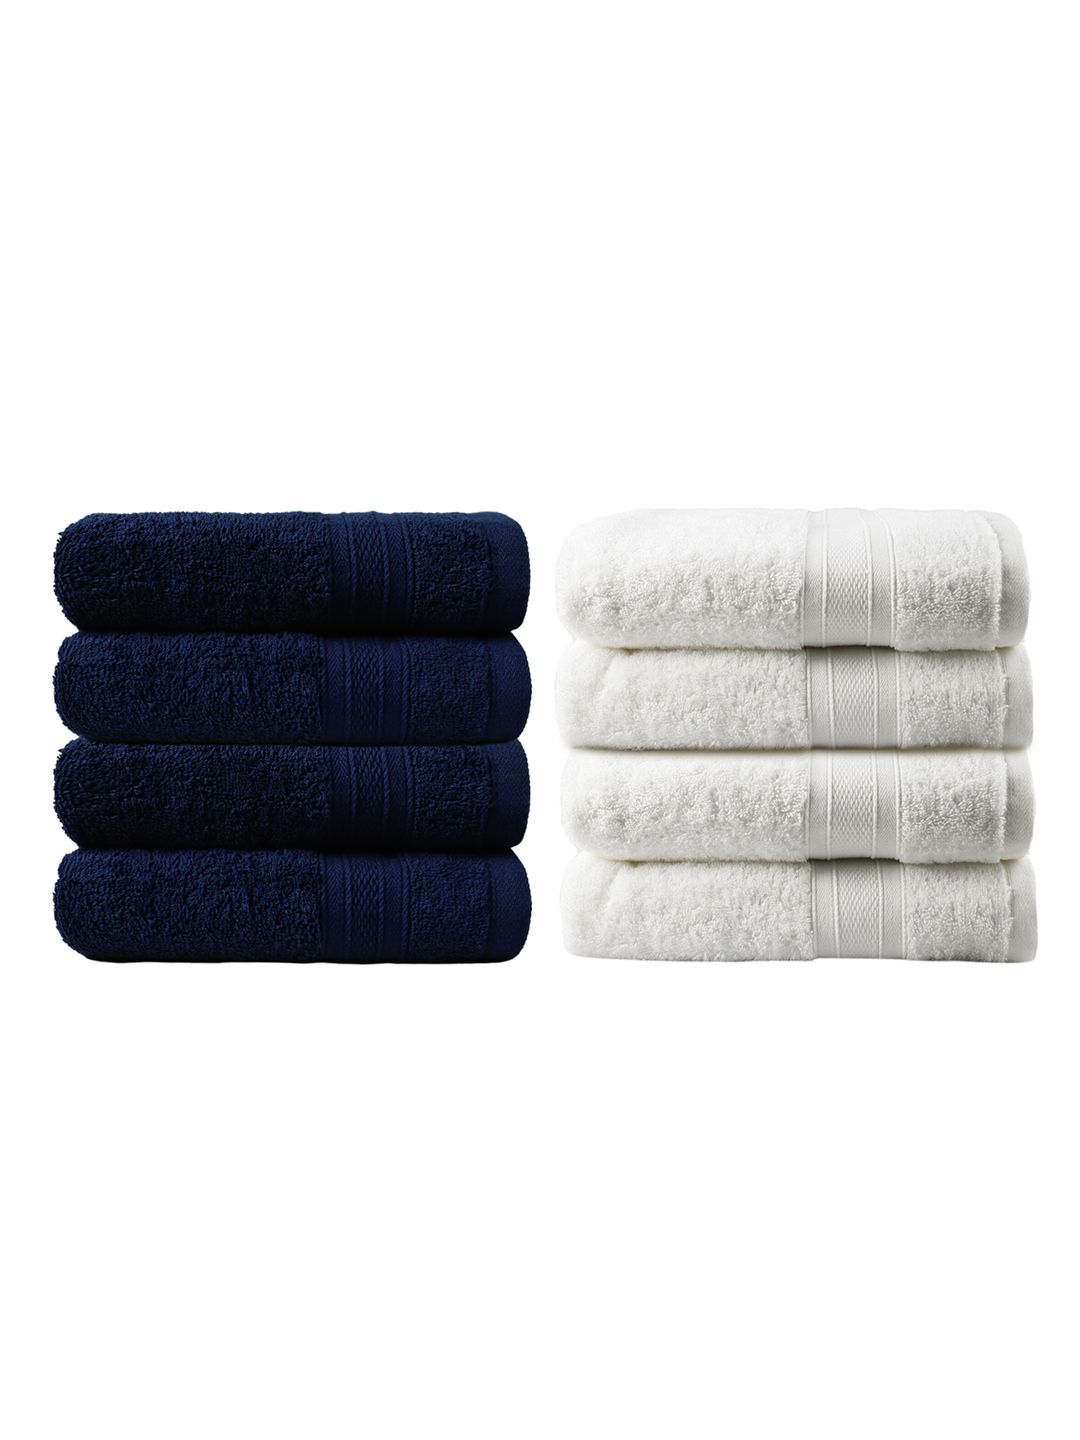 Trident Unisex Set of 4 White 500 GSM Cotton Bath Towels & 4 500 GSM Cotton Hand Towels Price in India